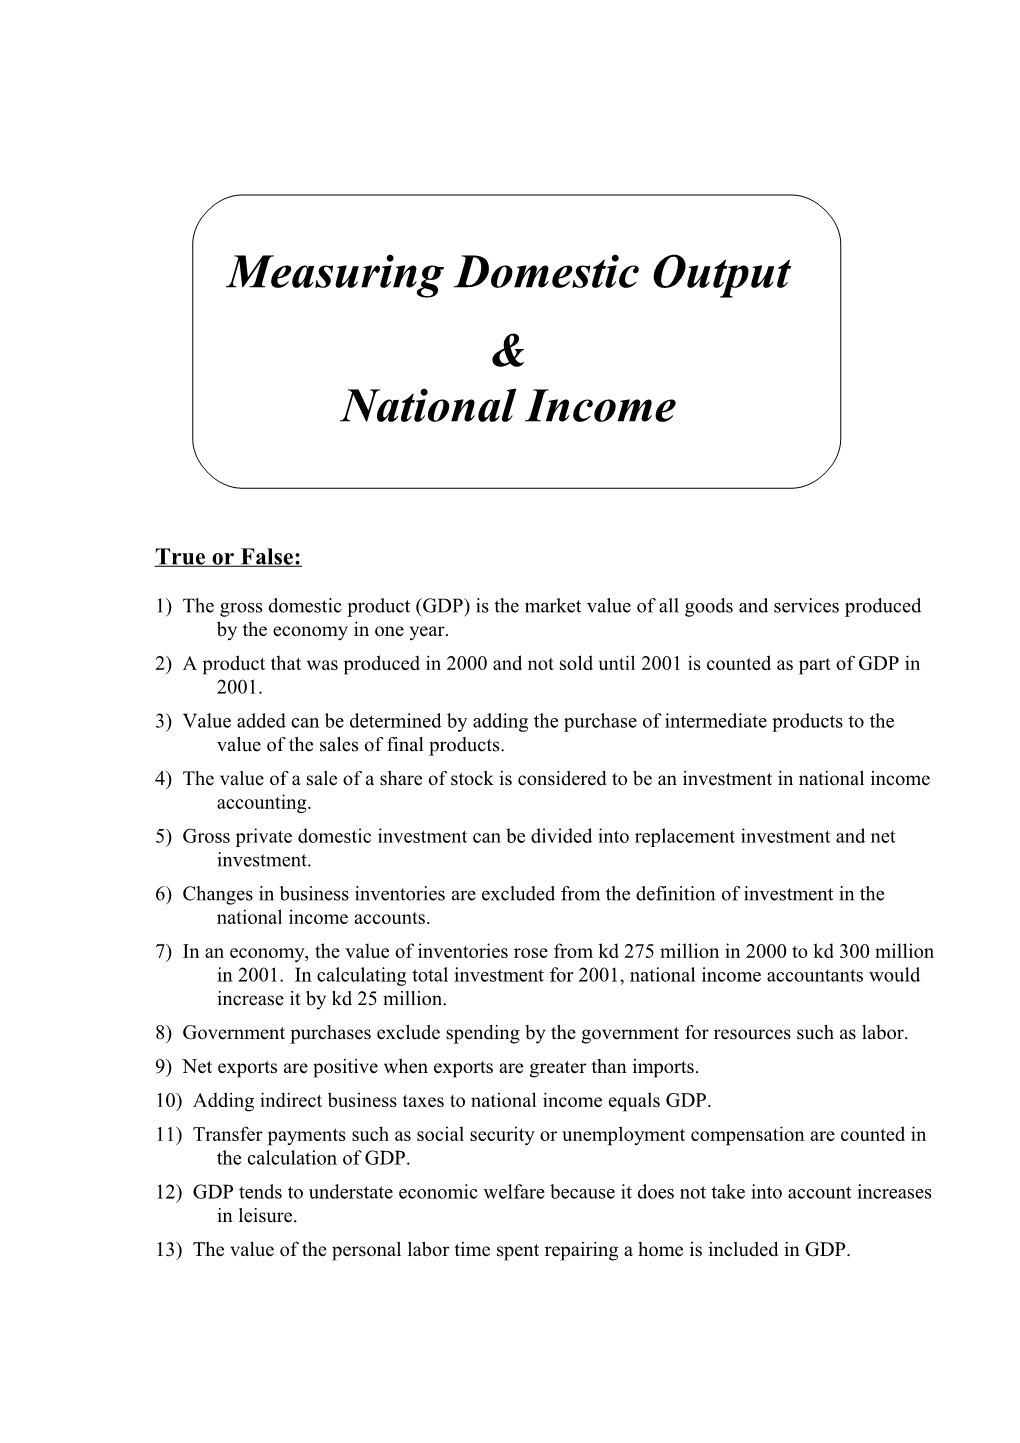 Measuring Domestic Output